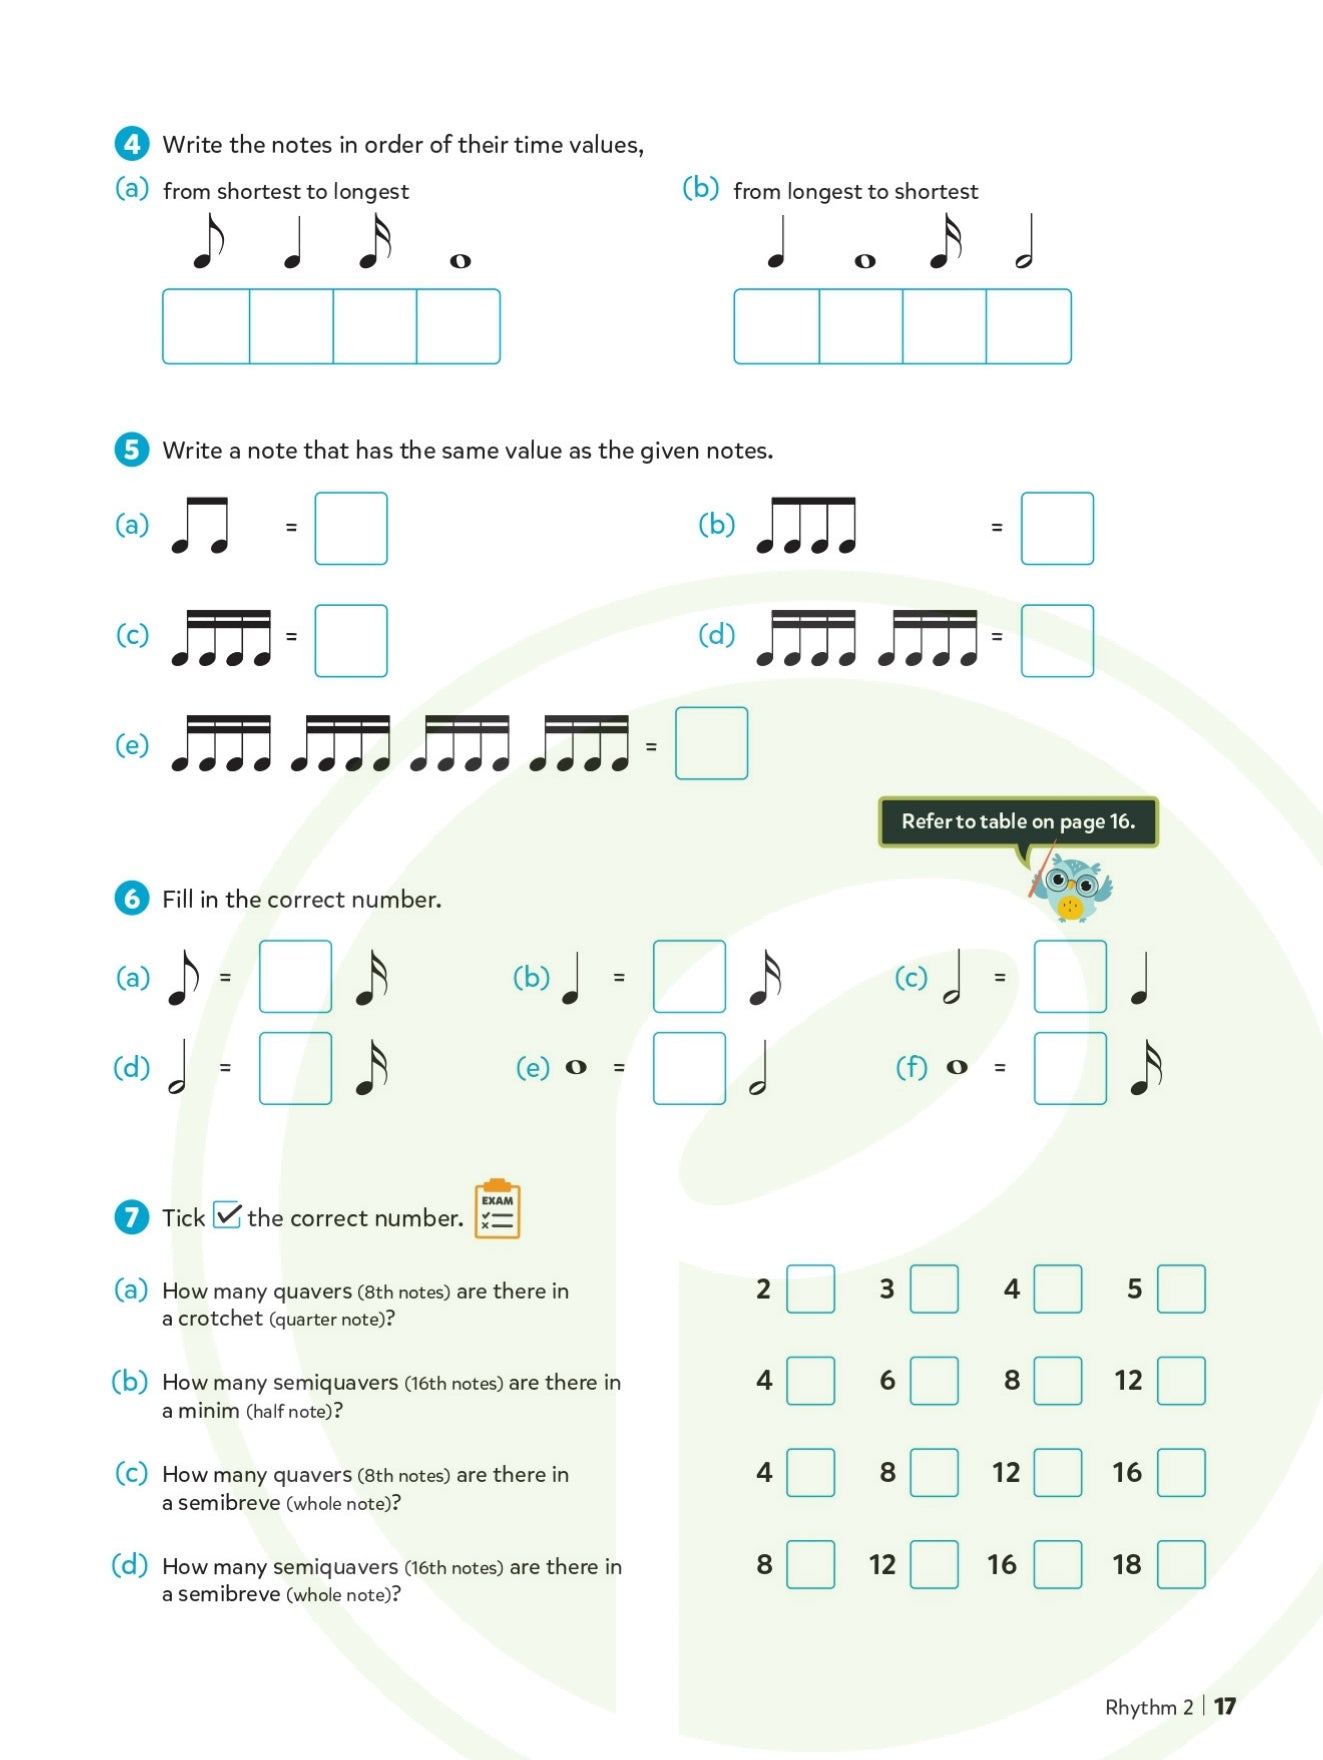 Music Theory for Young Musicians Grade 1